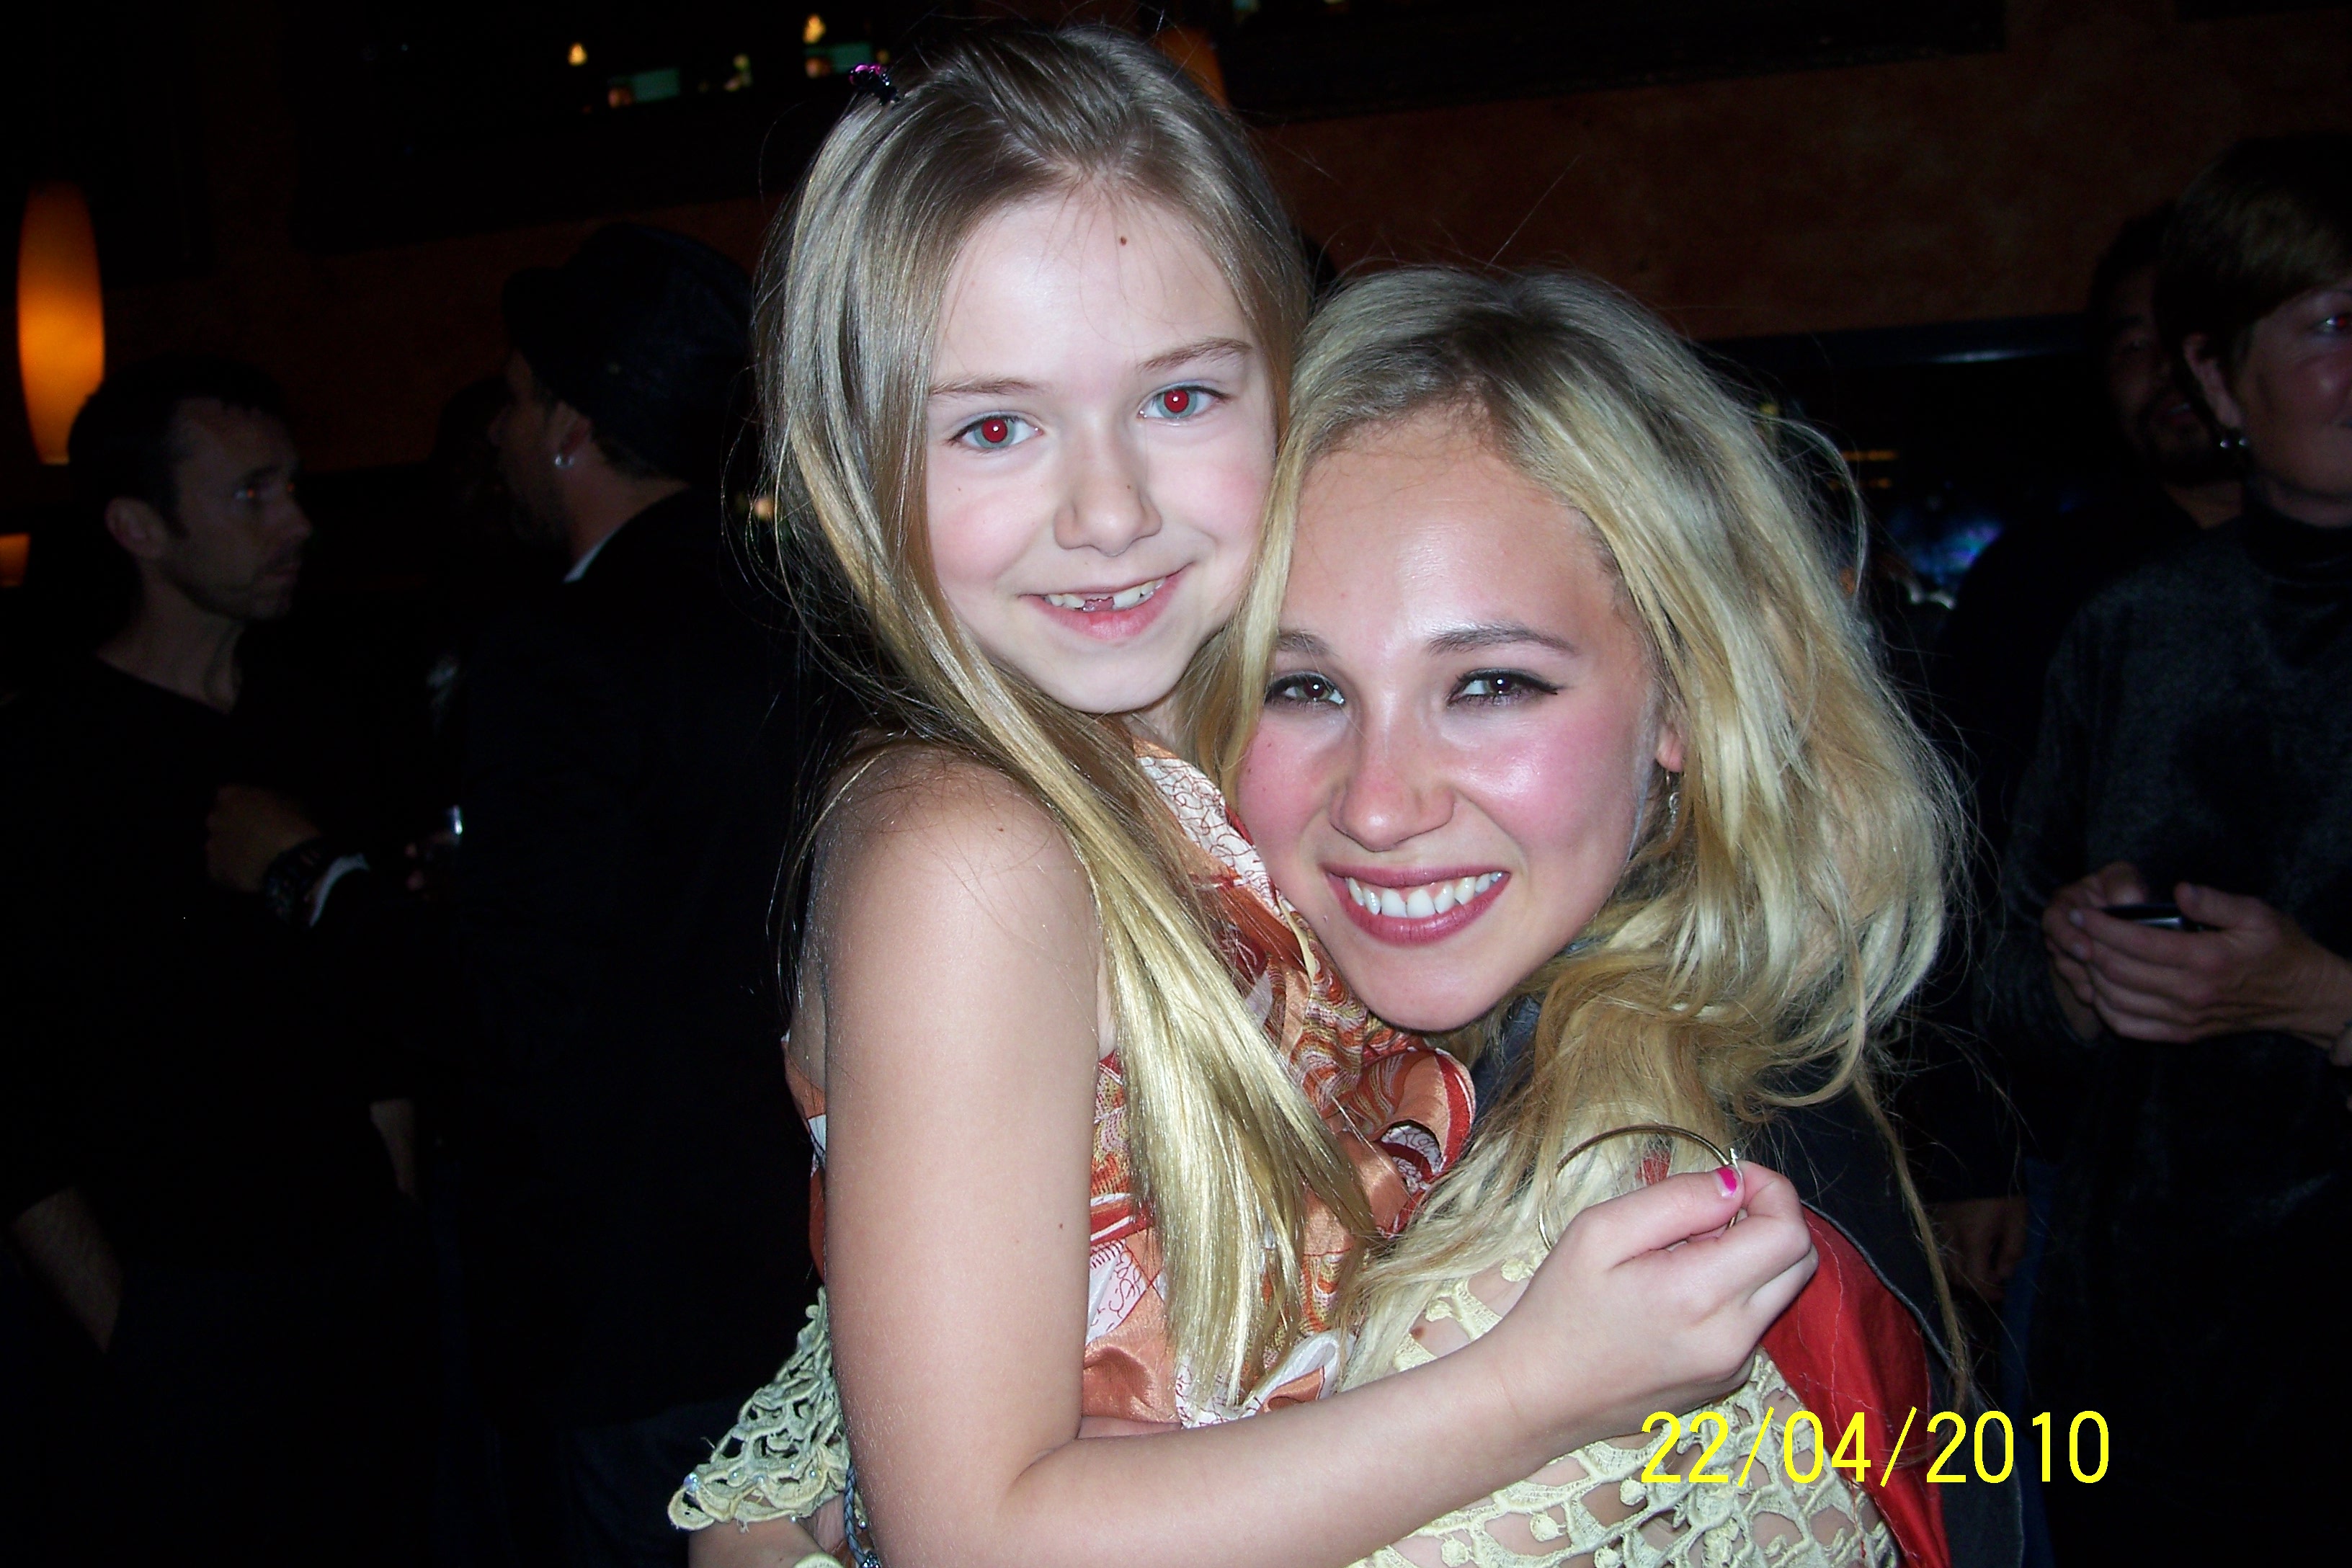 Madison and Juno at the Dirty Girl wrap party